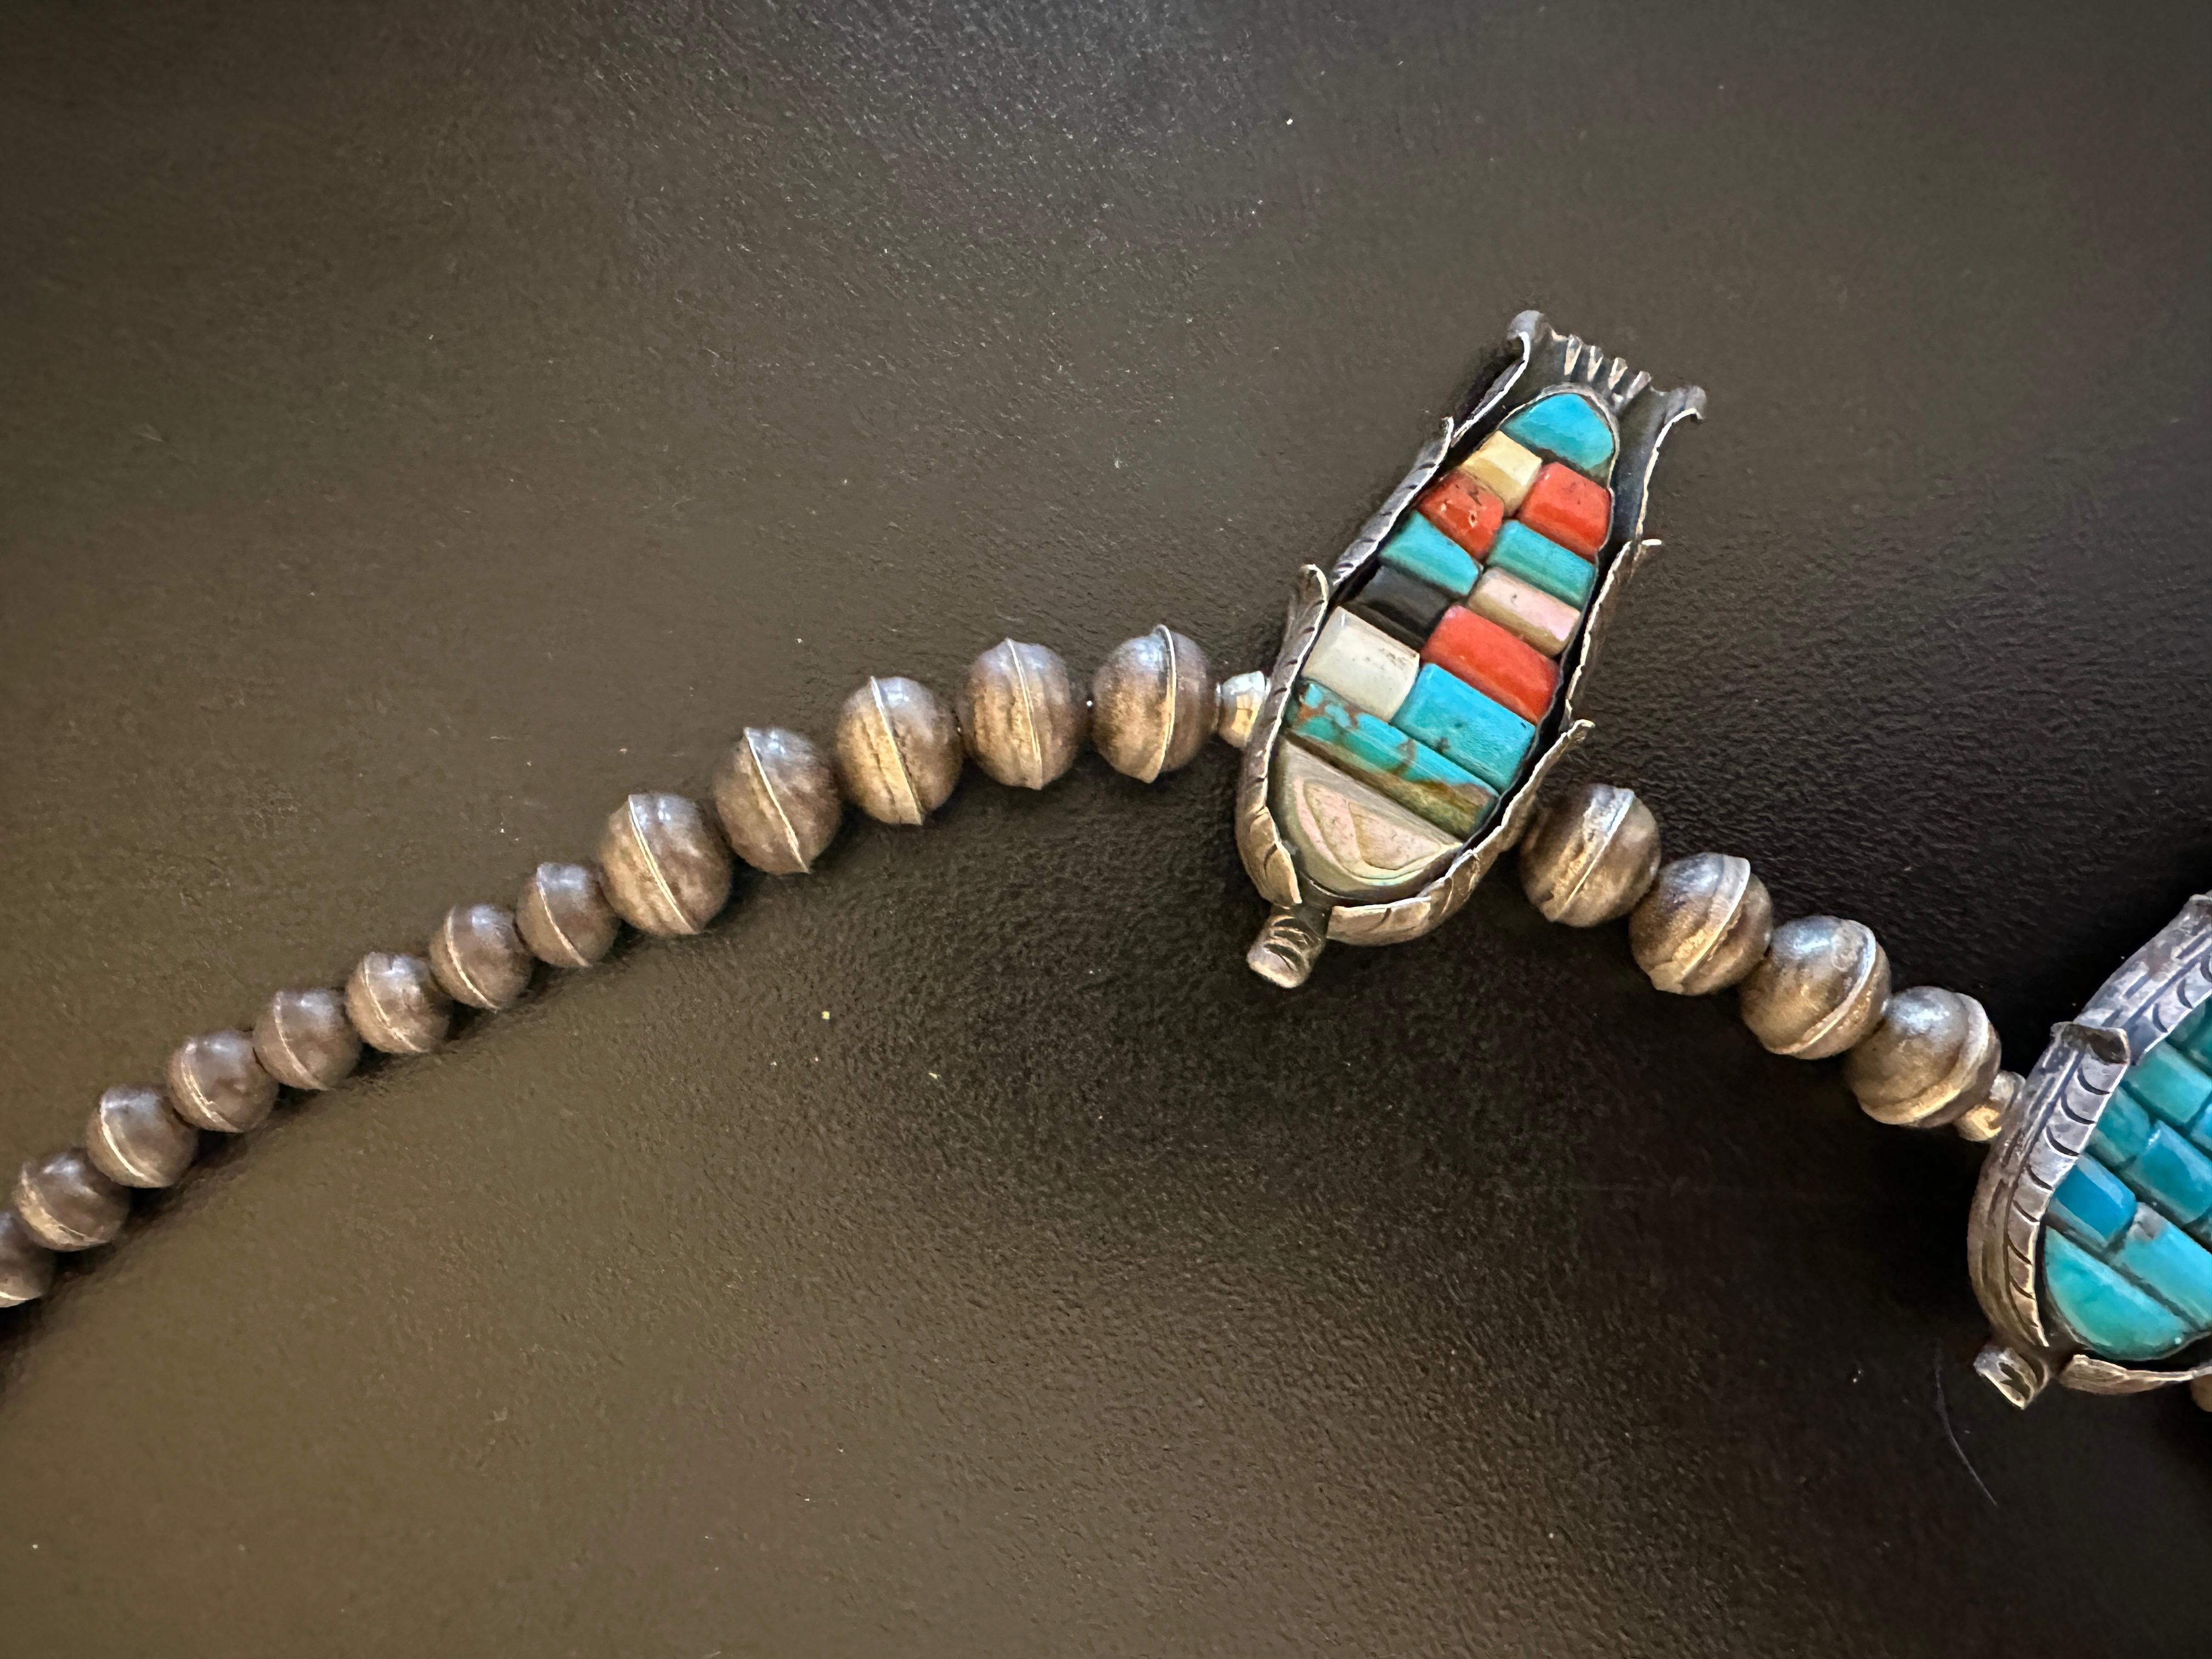  Navajo Corn Squash Blossom Necklace Museum Quality Native American Indian 1930 6